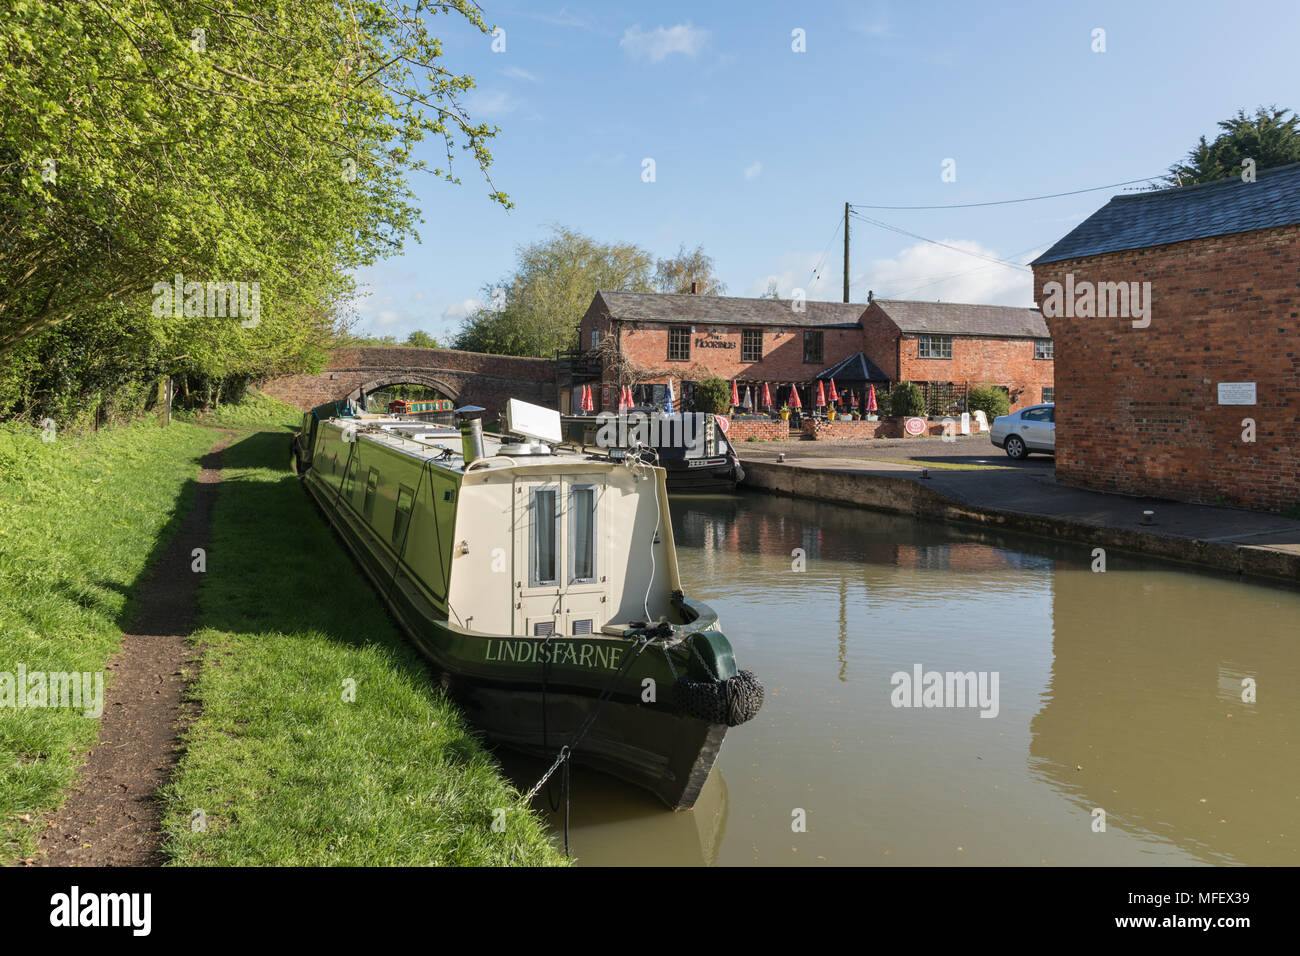 Narrowboats, lit by the spring morning sunshine, are moored at Crick Wharf. Furled umbrellas are in the garden of the restaurant on the opposite bank. Stock Photo